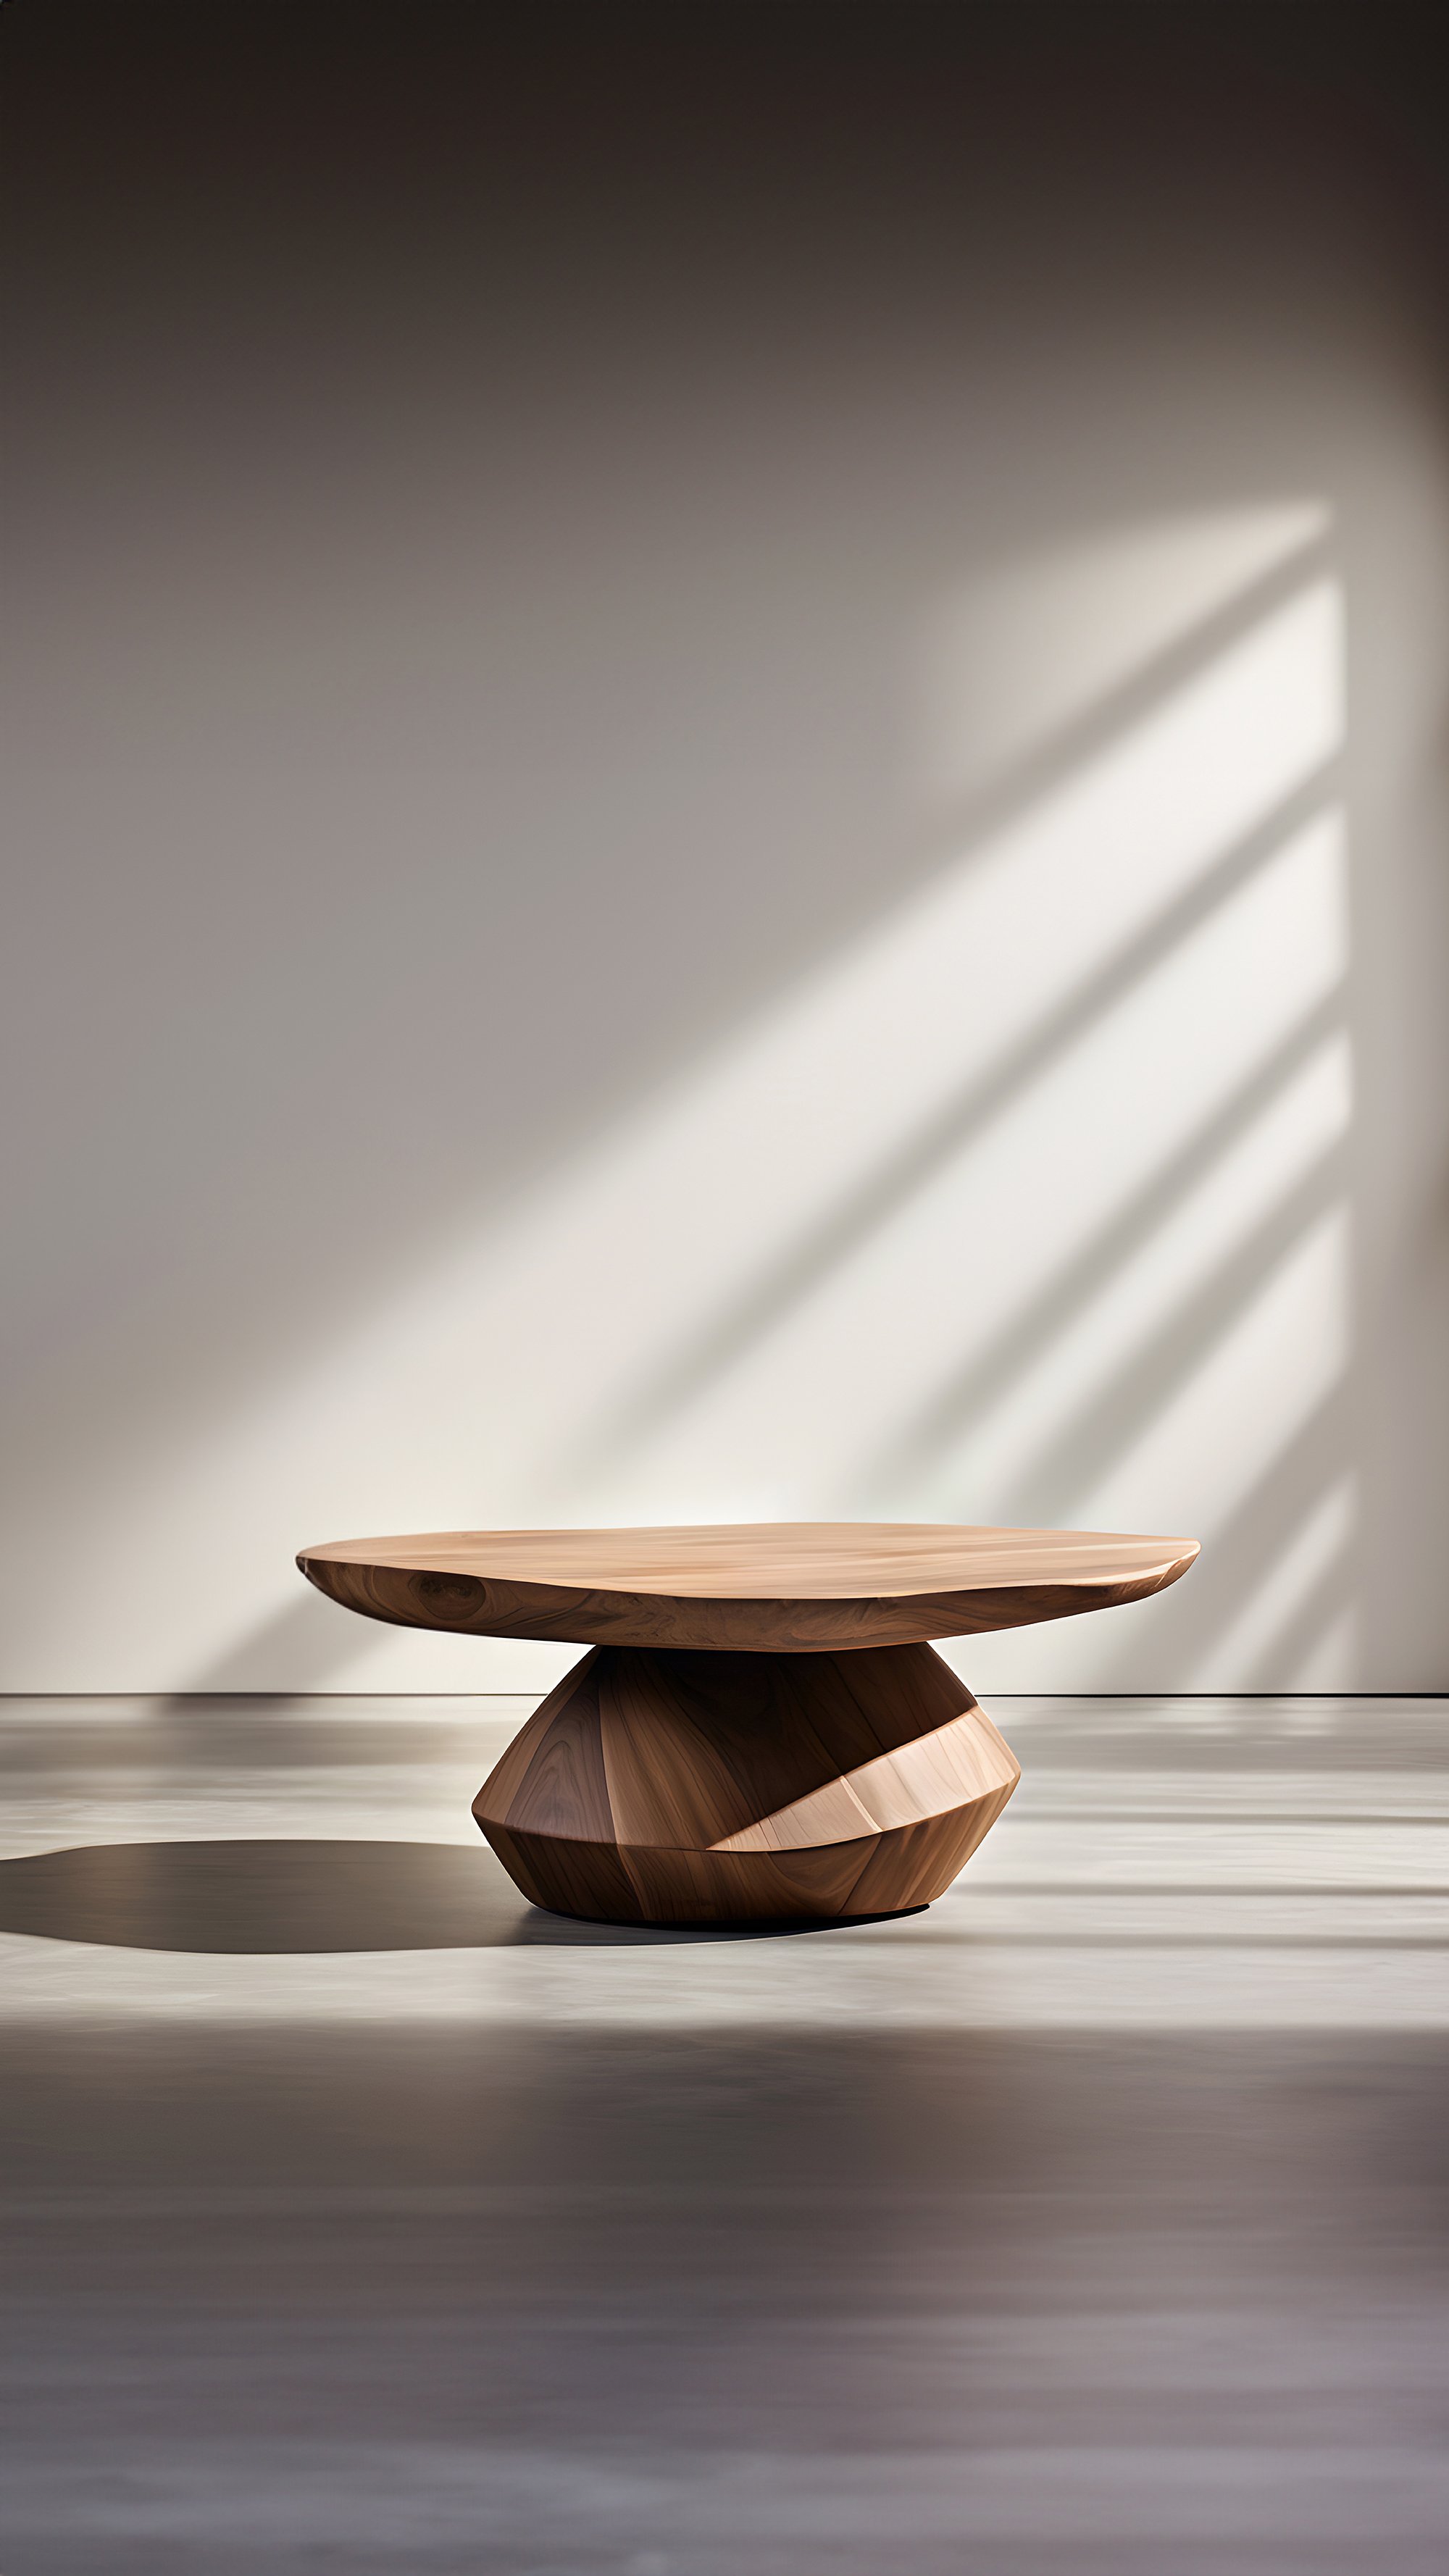 Sculptural Coffee Table Made of Solid Wood, Center Table Solace S33 by Joel Escalona — 8.jpg